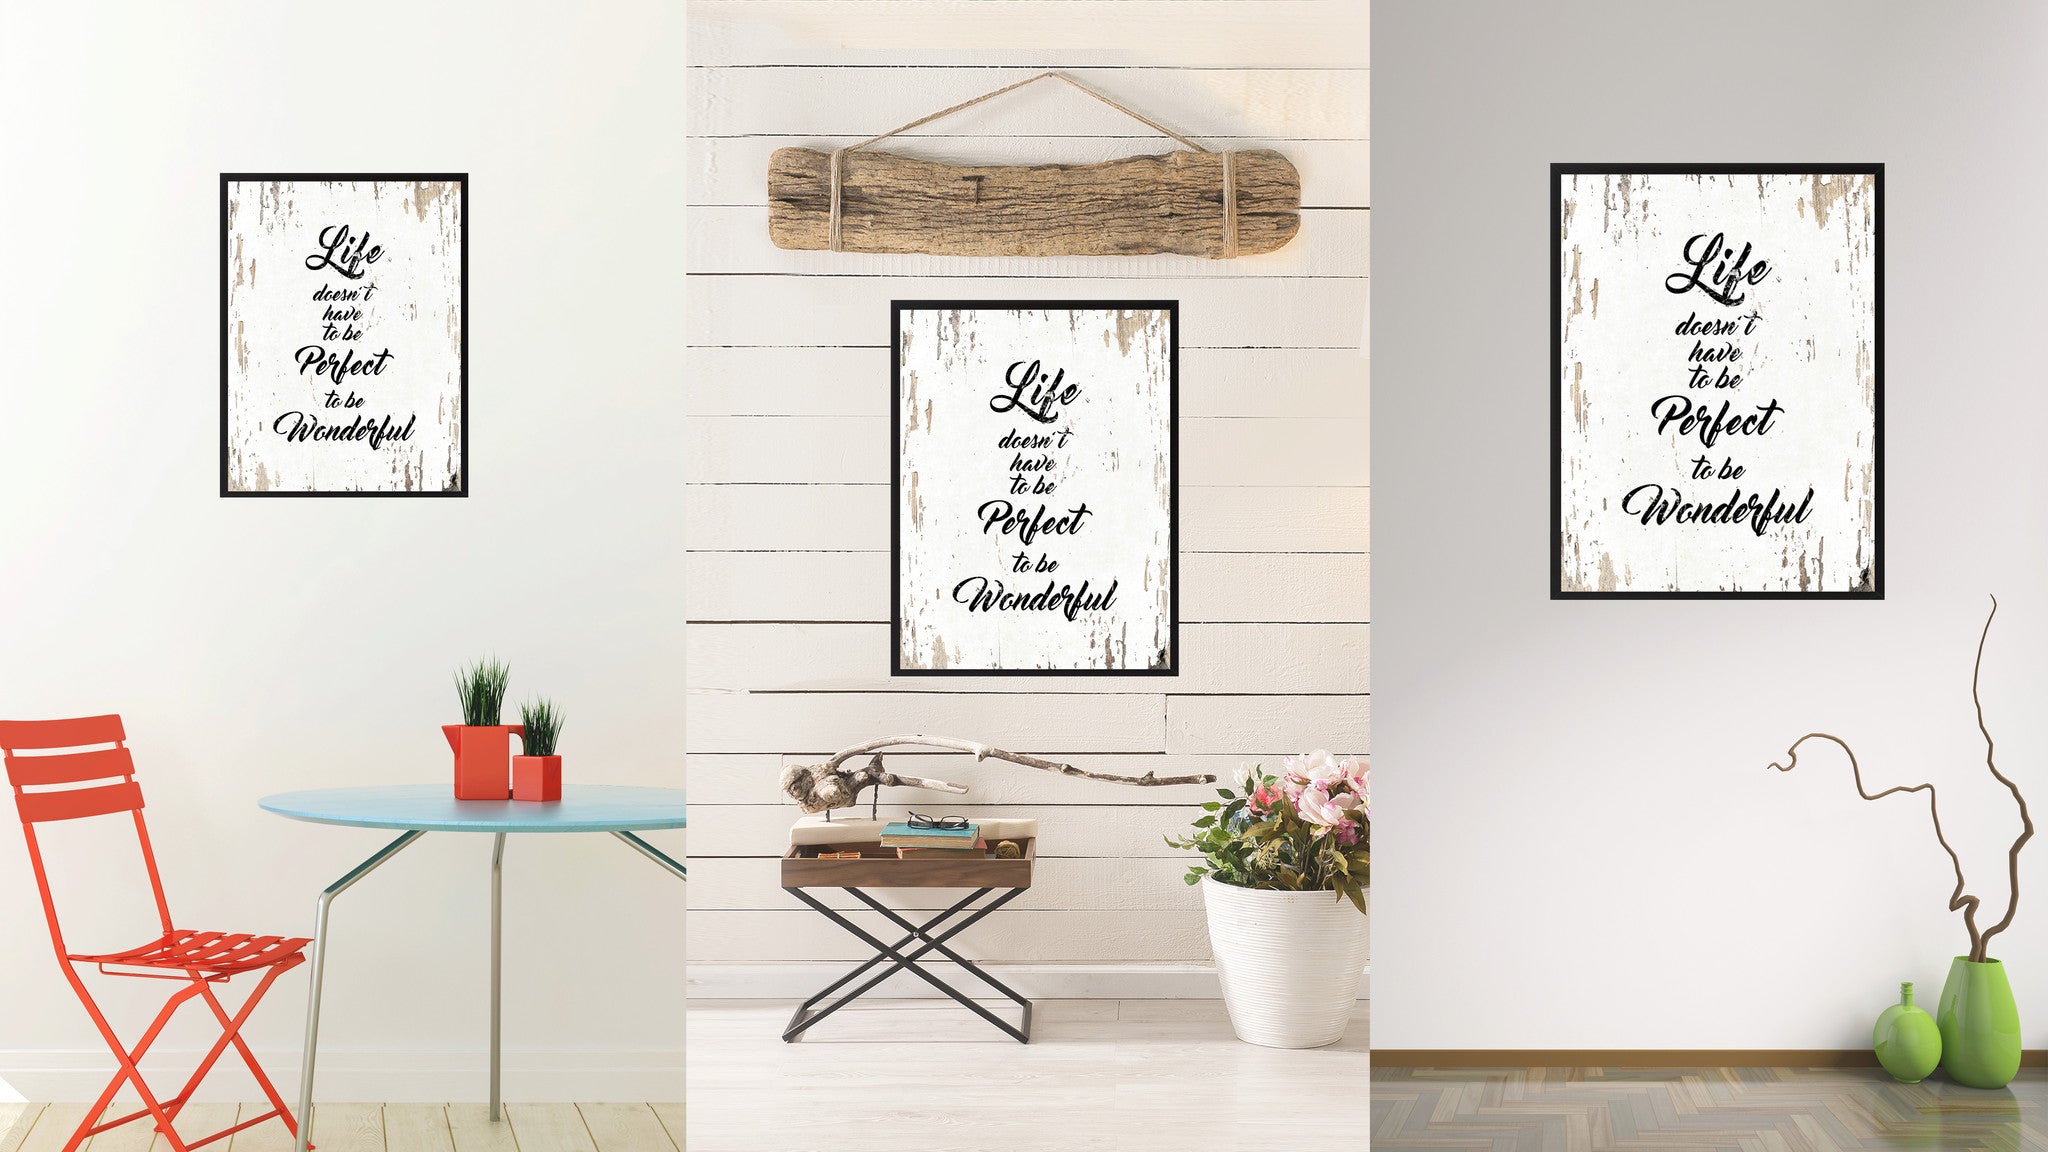 Life doesn't have to be perfect Inspirational Quote Saying Gift Ideas Home Décor Wall Art